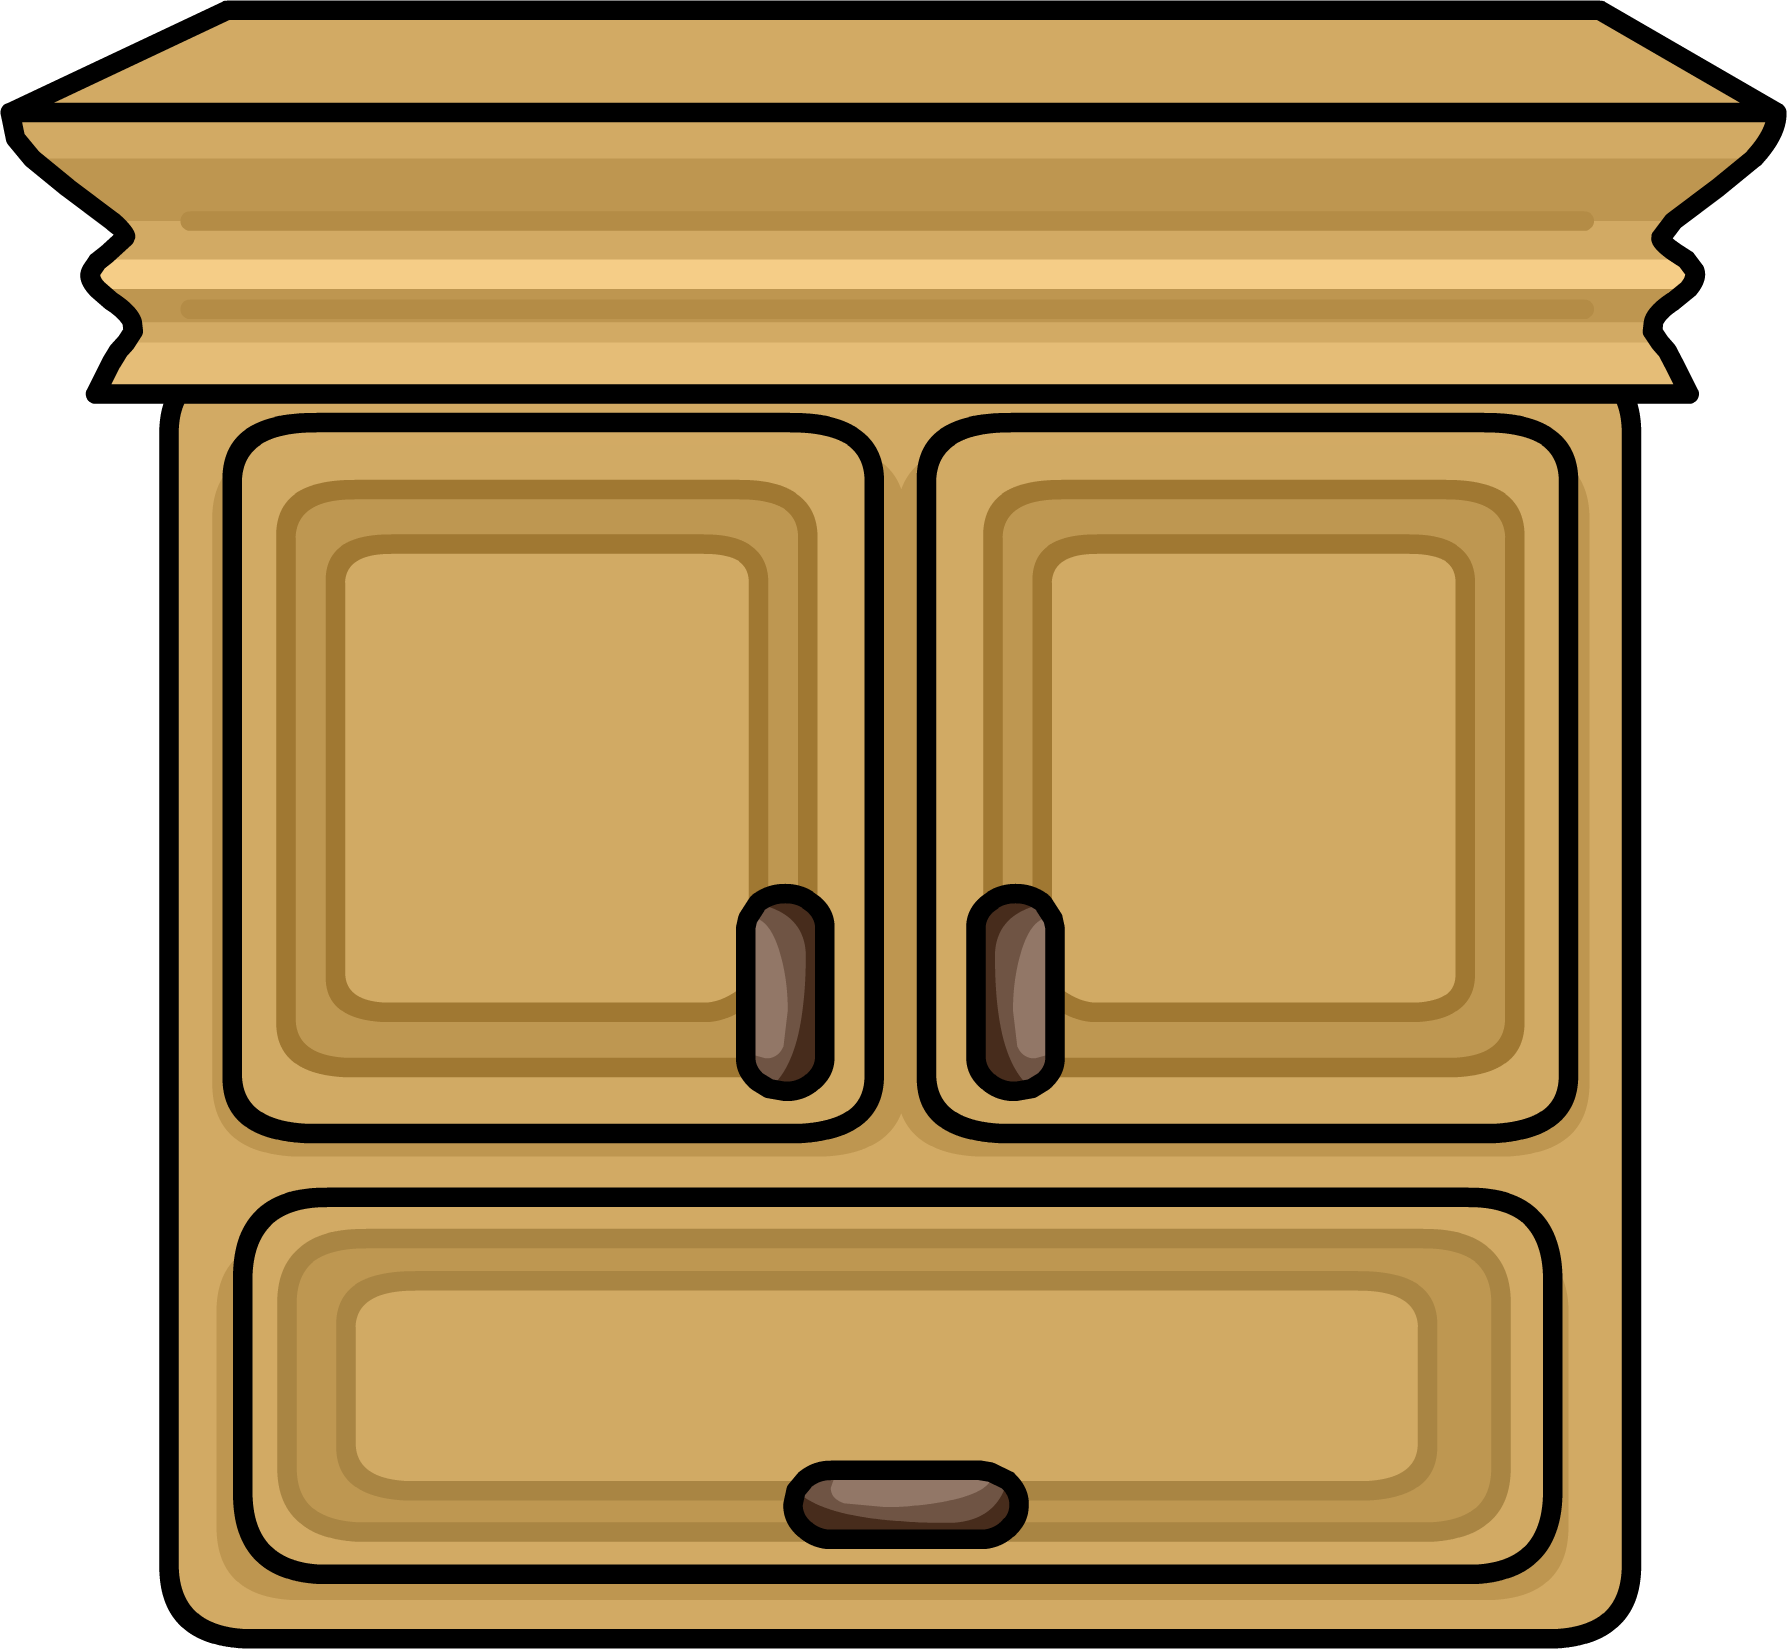 Image - Cabinet sprite 004.png | Club Penguin Wiki | FANDOM powered by ...